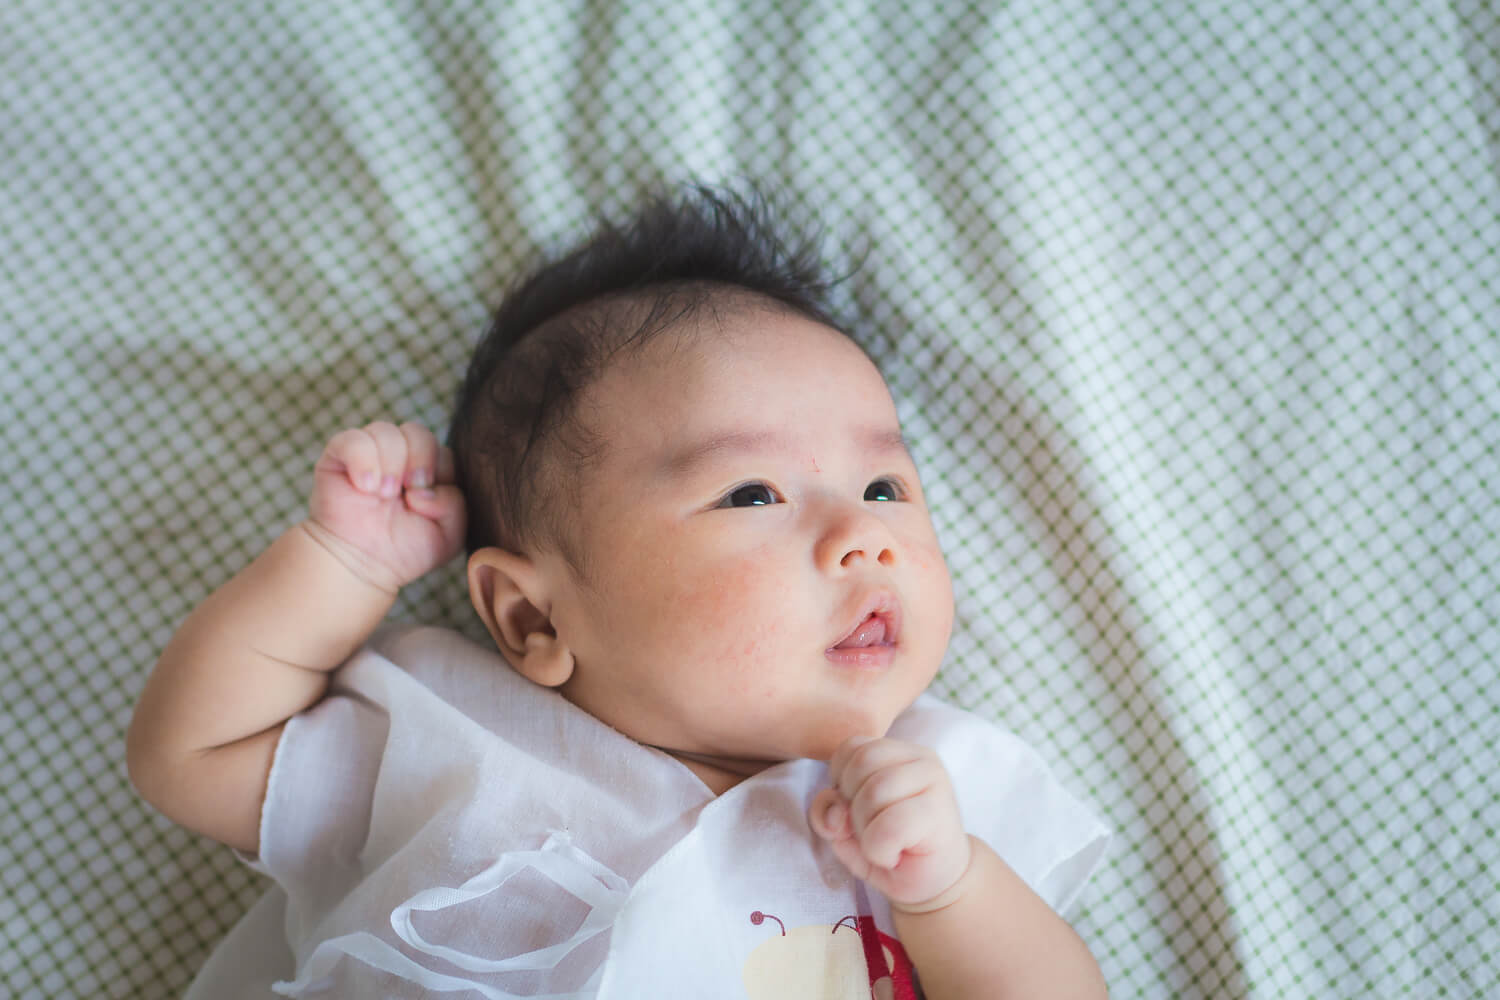 Why Do Babies Clench Their Fists?